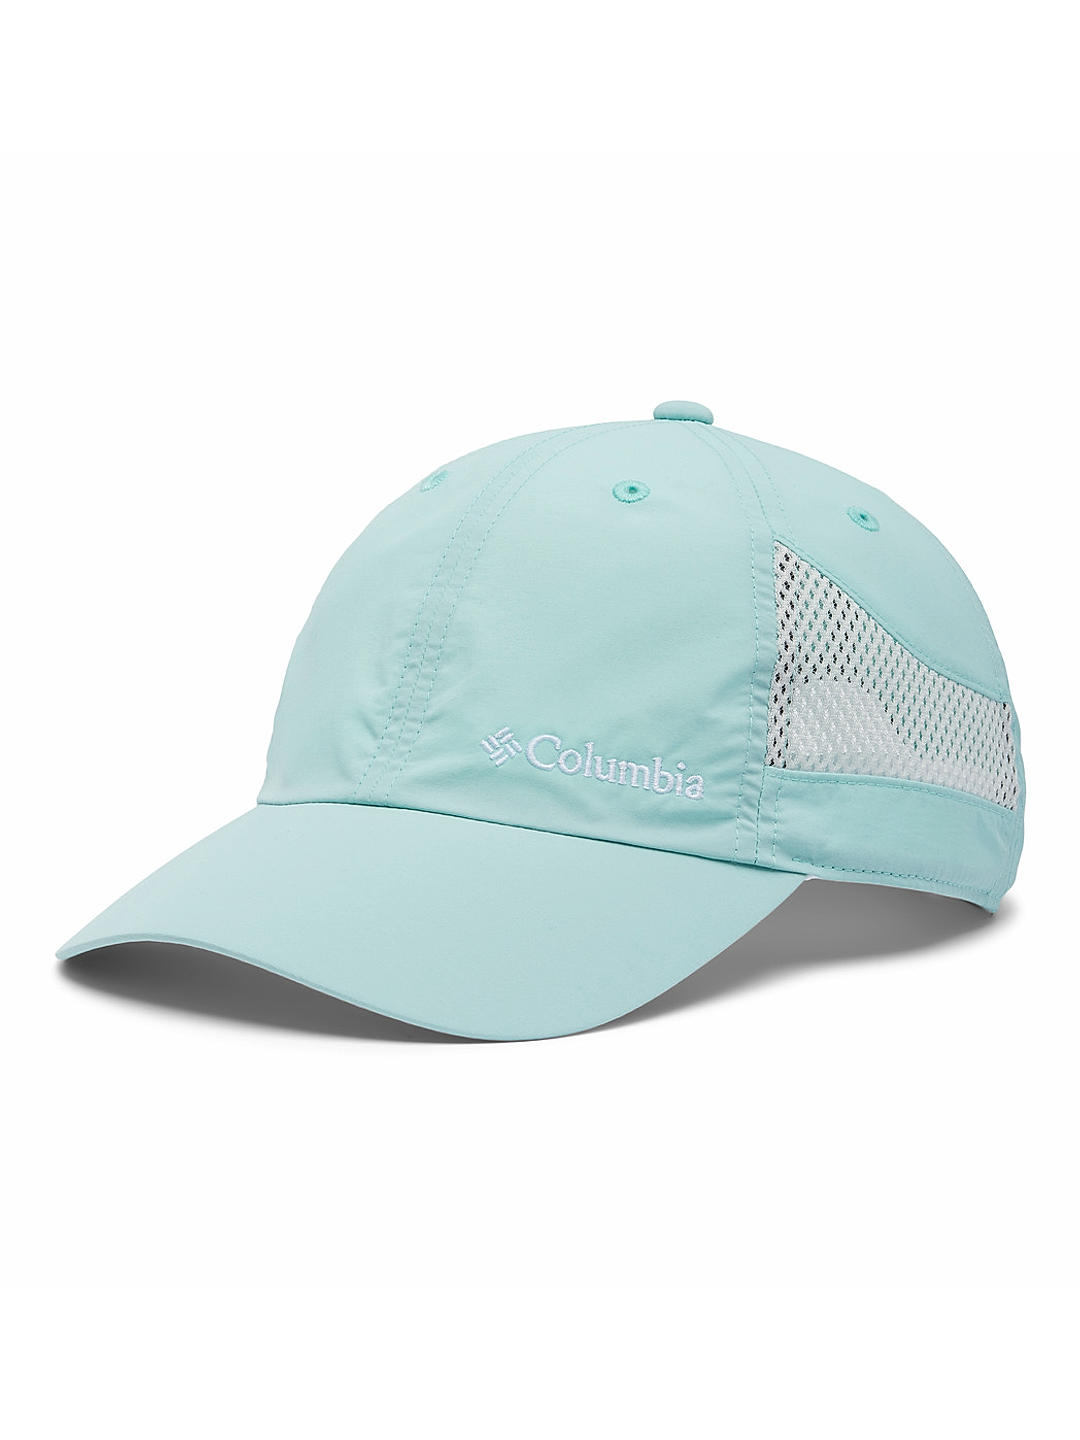 Buy Green Tech Shade Hat for Men and Women Online at Columbia Sportswear